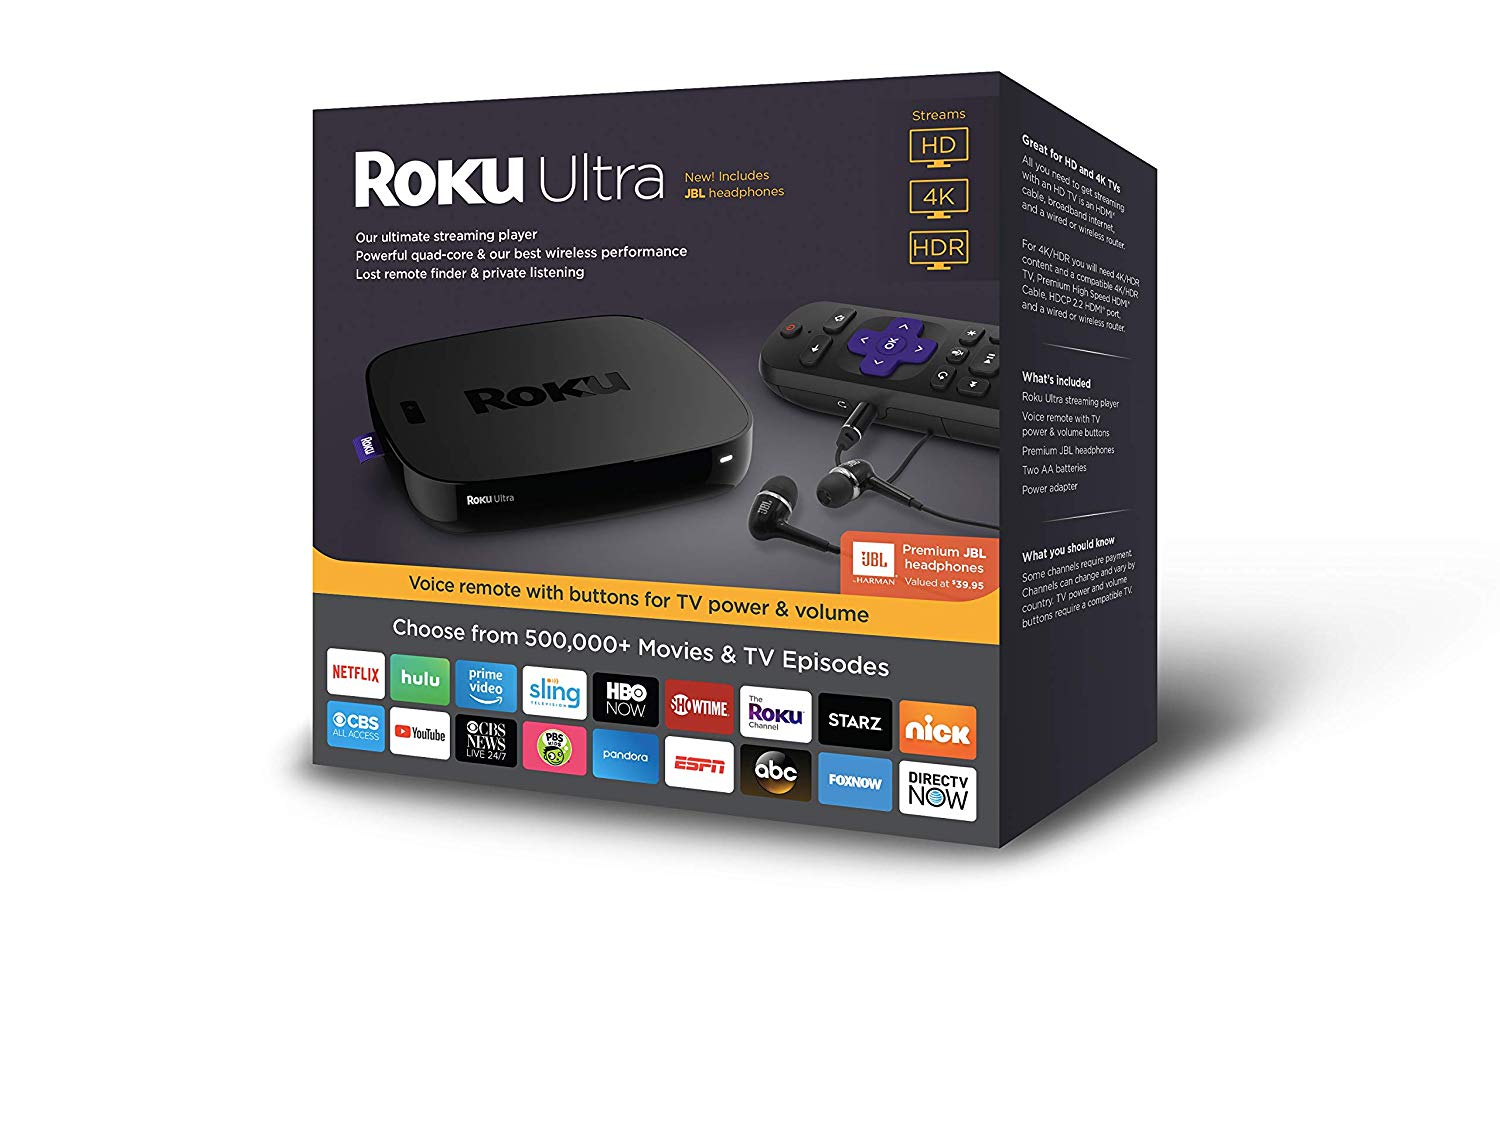 Roku Ultra 4K HDR Streaming Media Player review